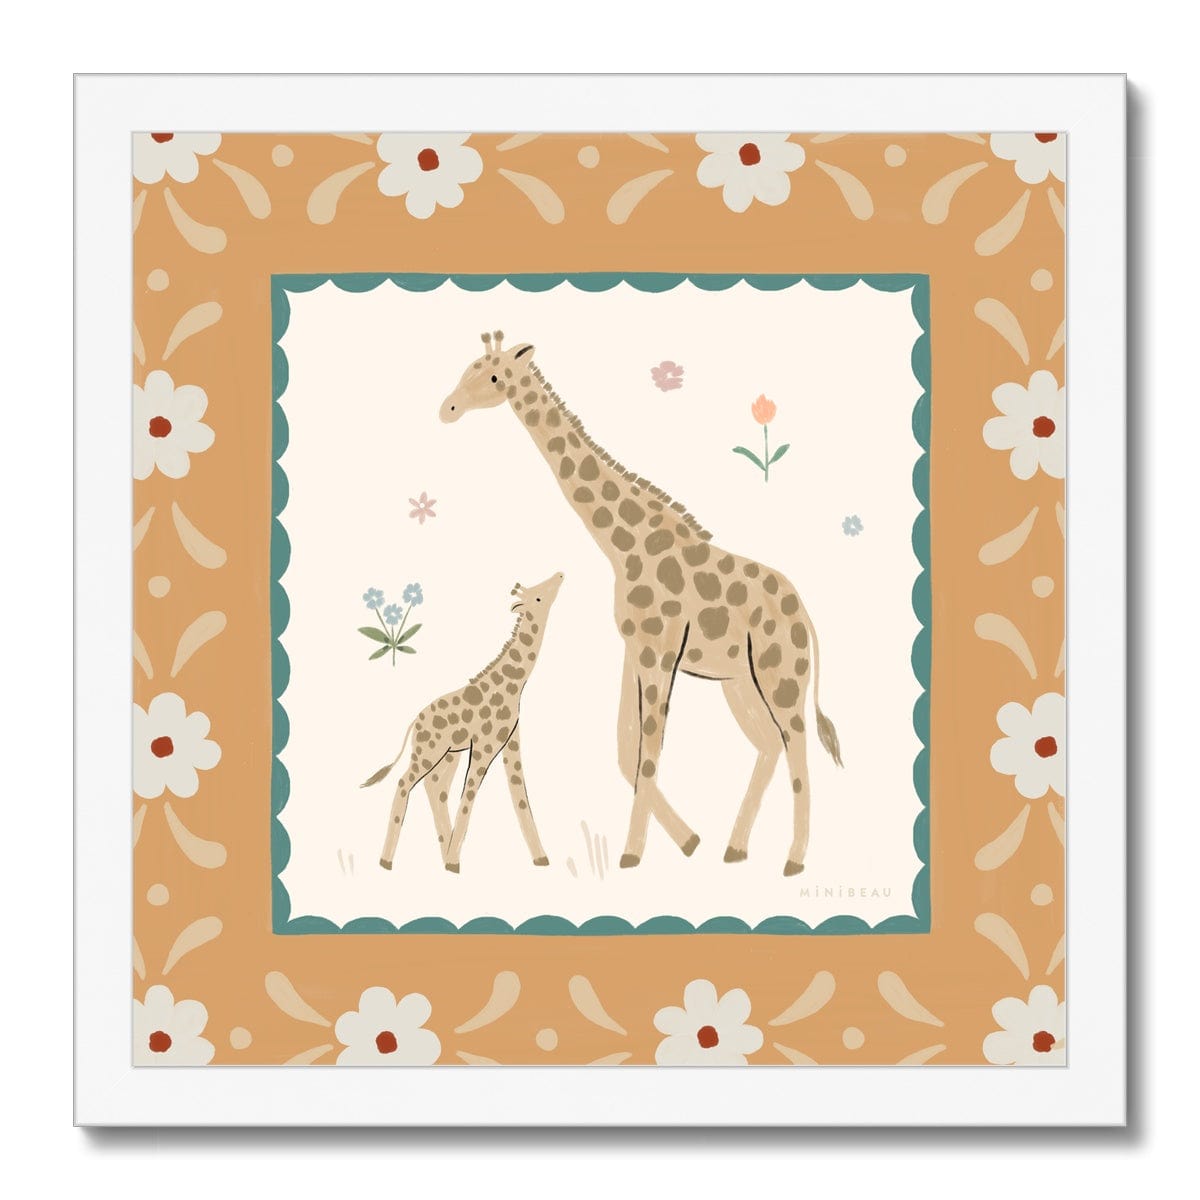 Our pretty Serengeti Giraffe art print is square and features and adult and baby giraffe. facing each other with the baby looking up and the grown up, on a neutral background with some simple flower. The print is bordered with thing green scallops and a thick yellow border featuring white flowers in a white frame